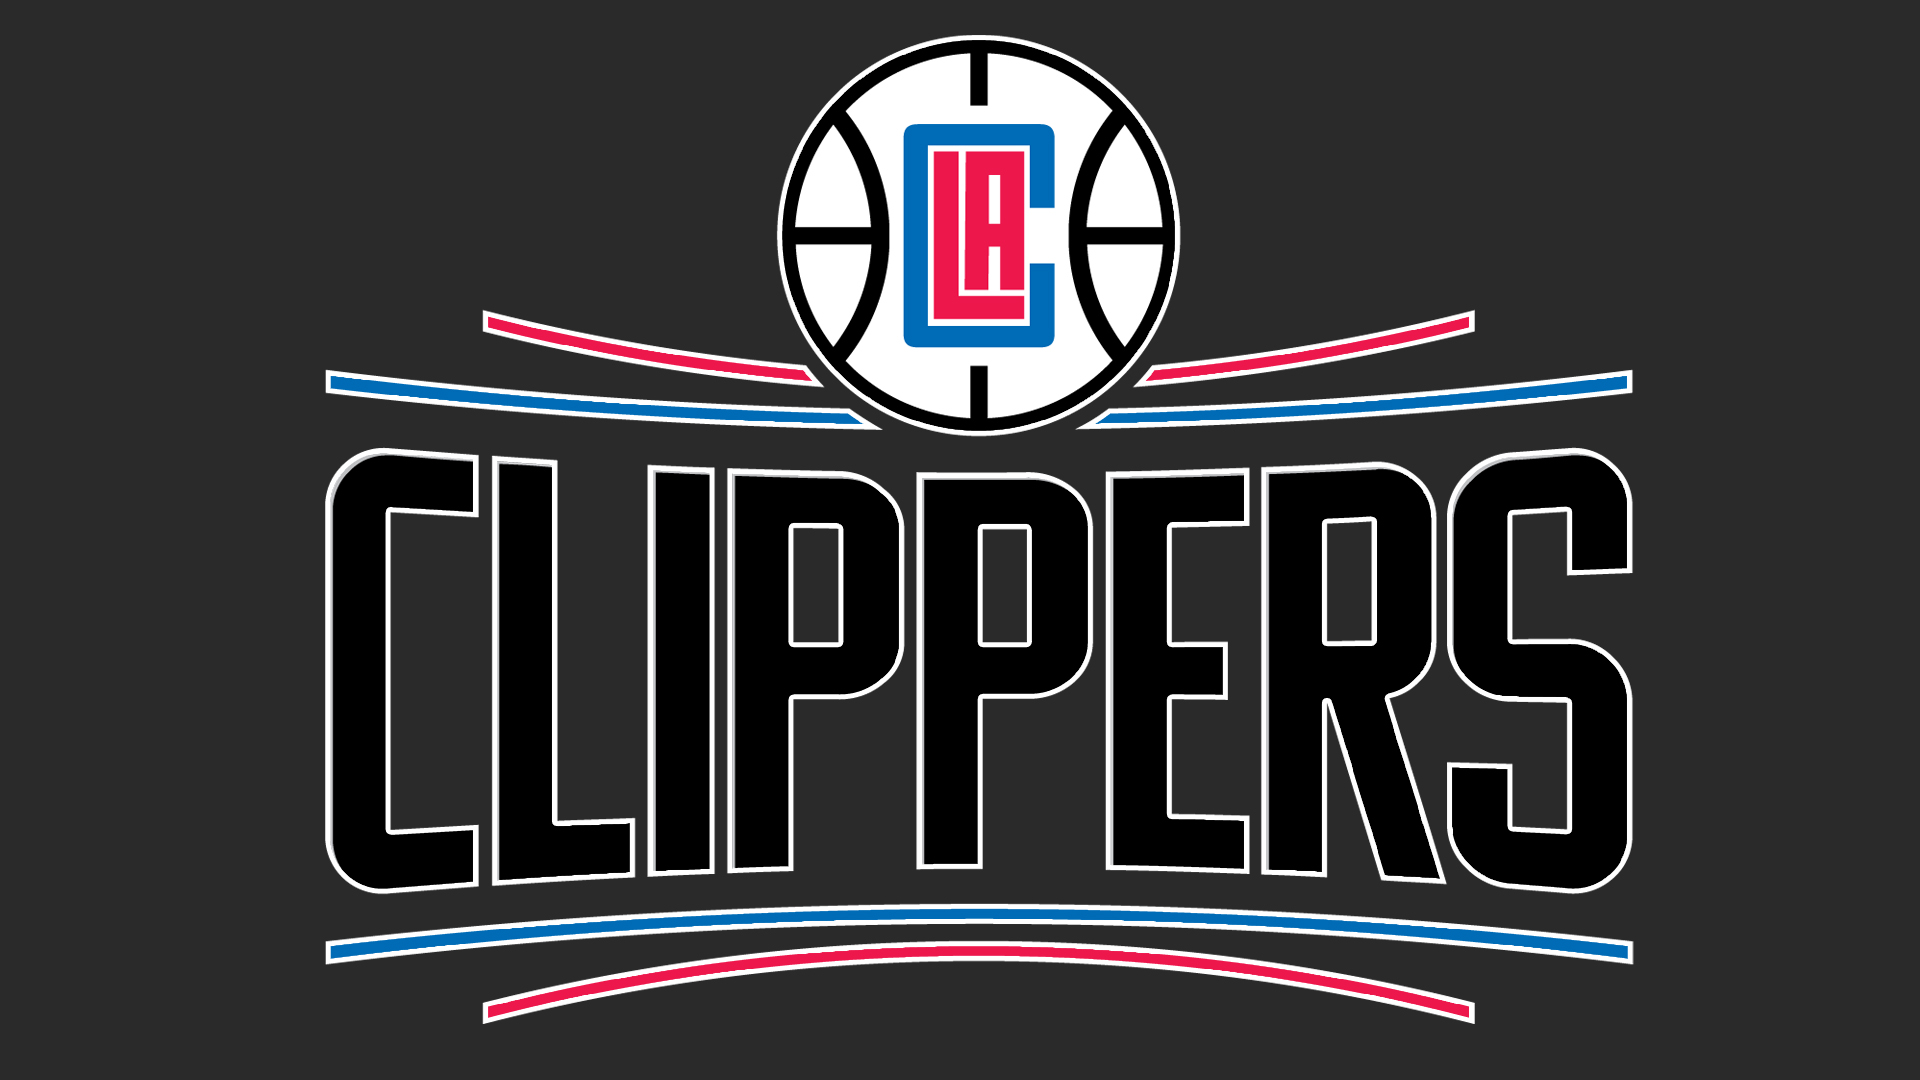 NBA Clippers wallpaper by wmrary - Download on ZEDGE™